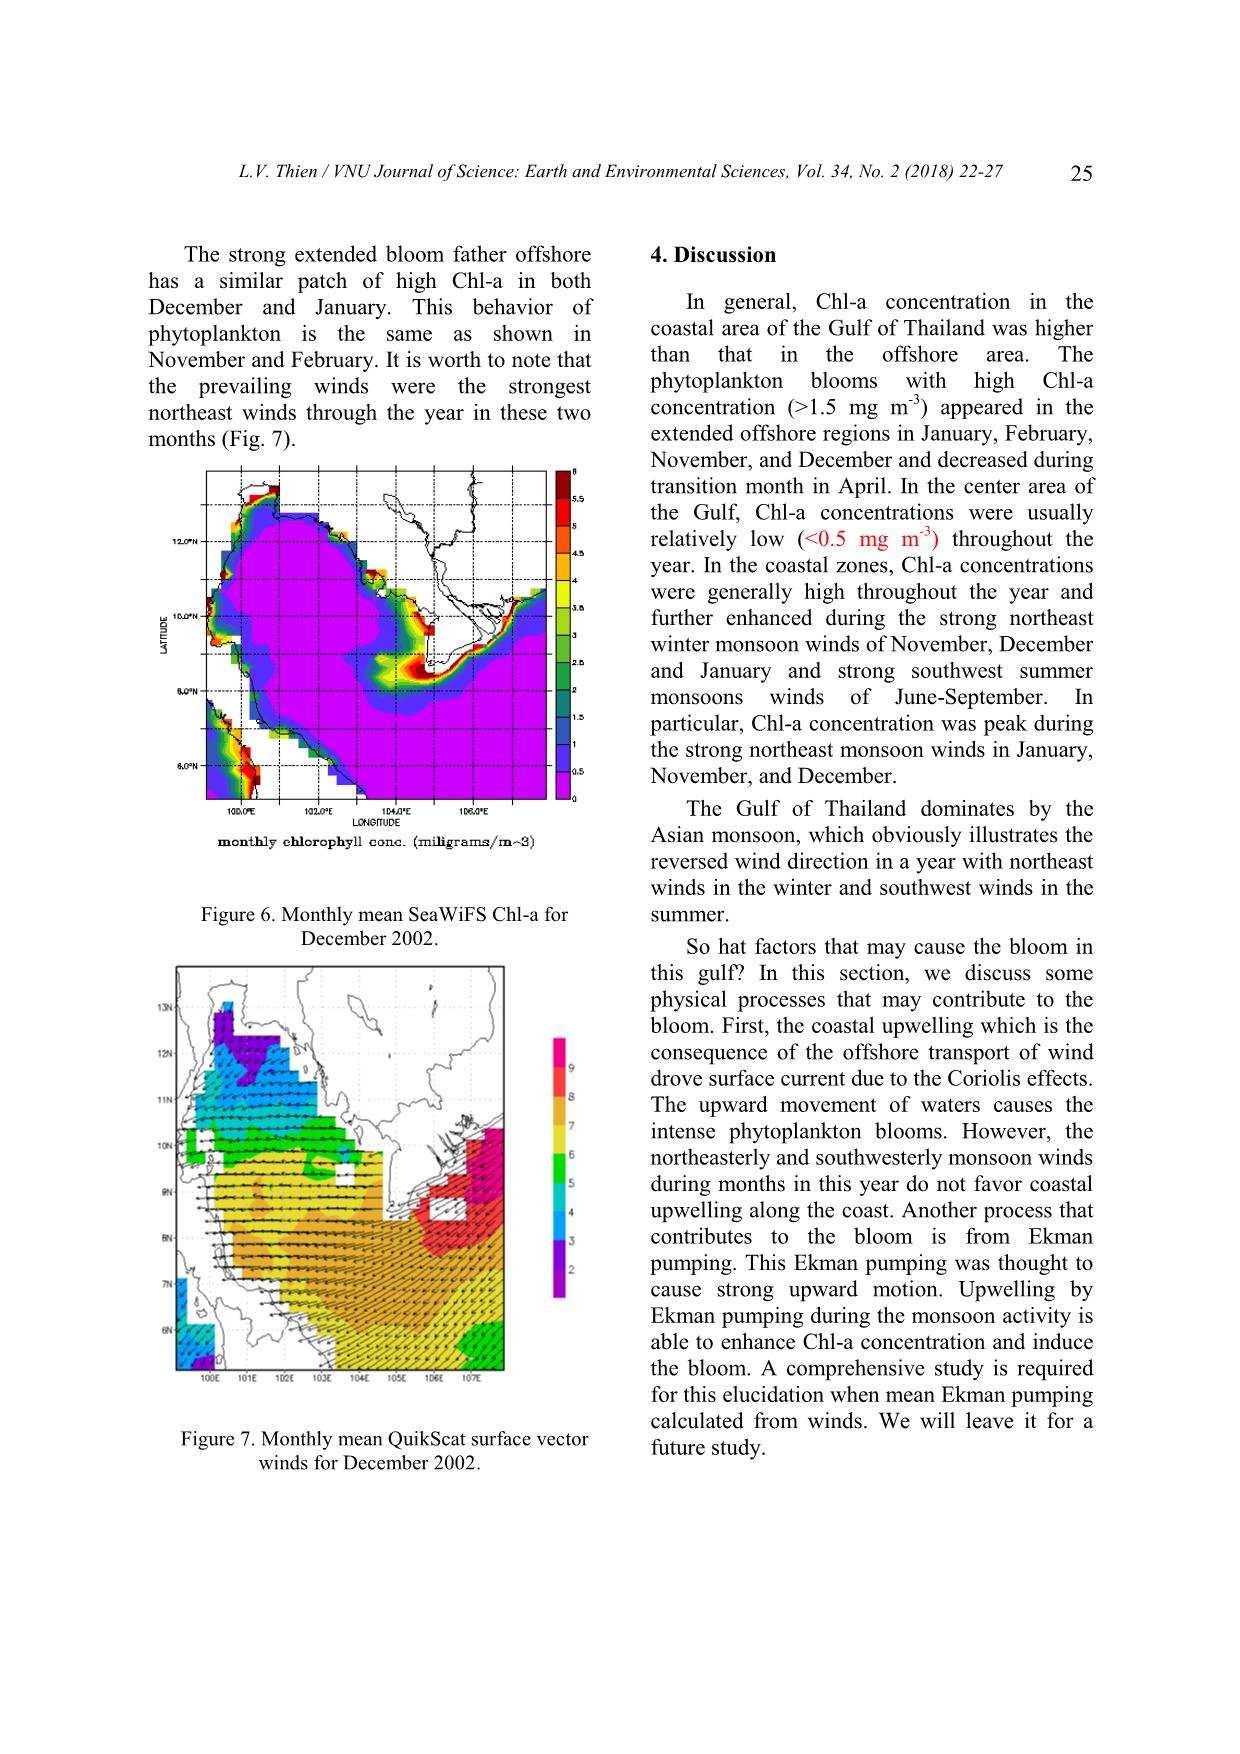 Effects of Monsoon Activity on Monthly Phytoplankton Blooms in the Gulf of Thai Land in El Nino Year 2002 trang 4